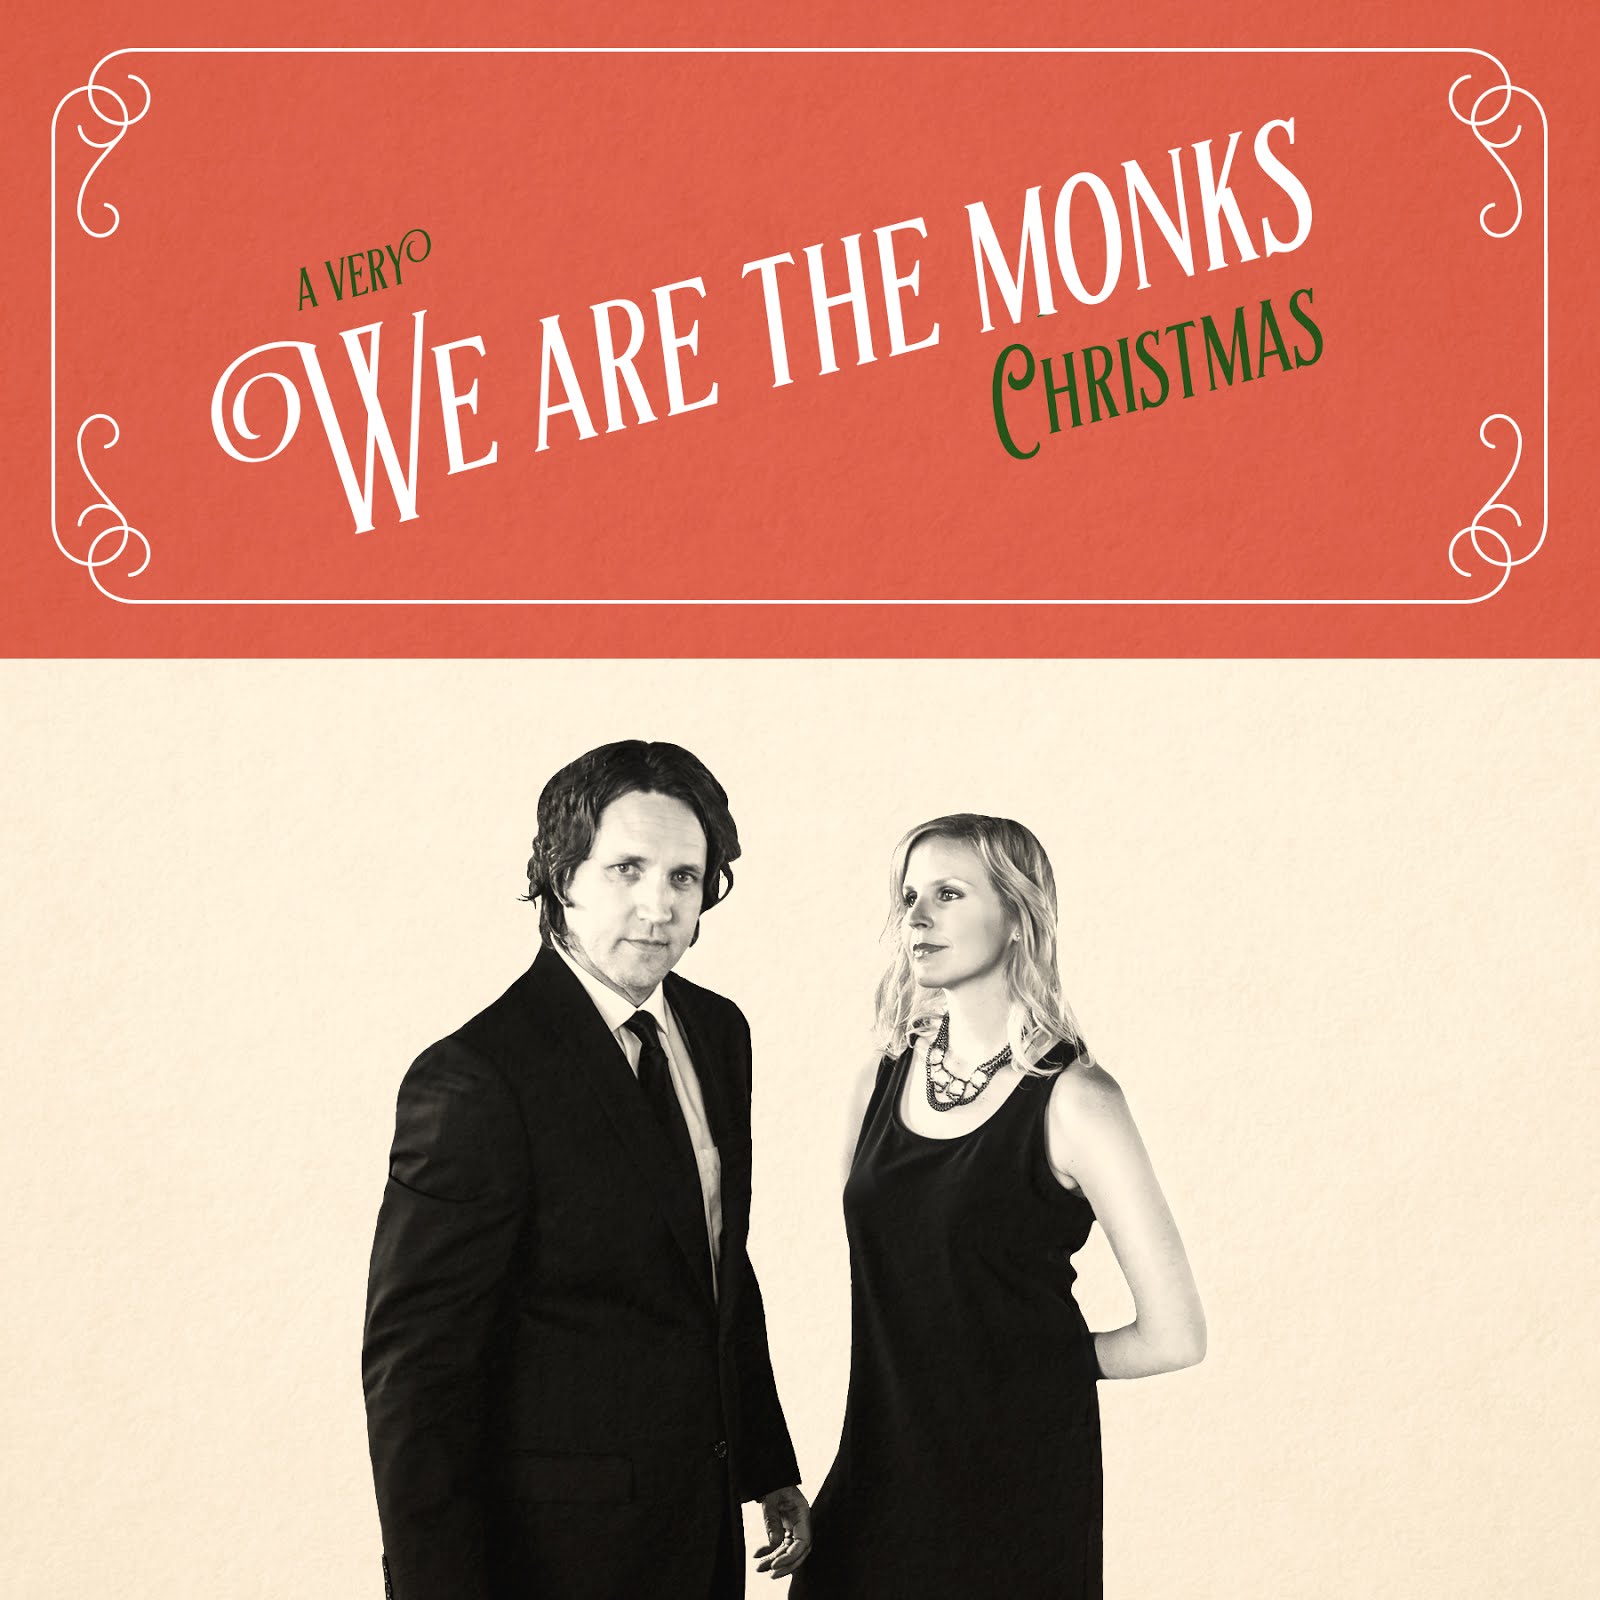 A Very We are the Monks Christmas